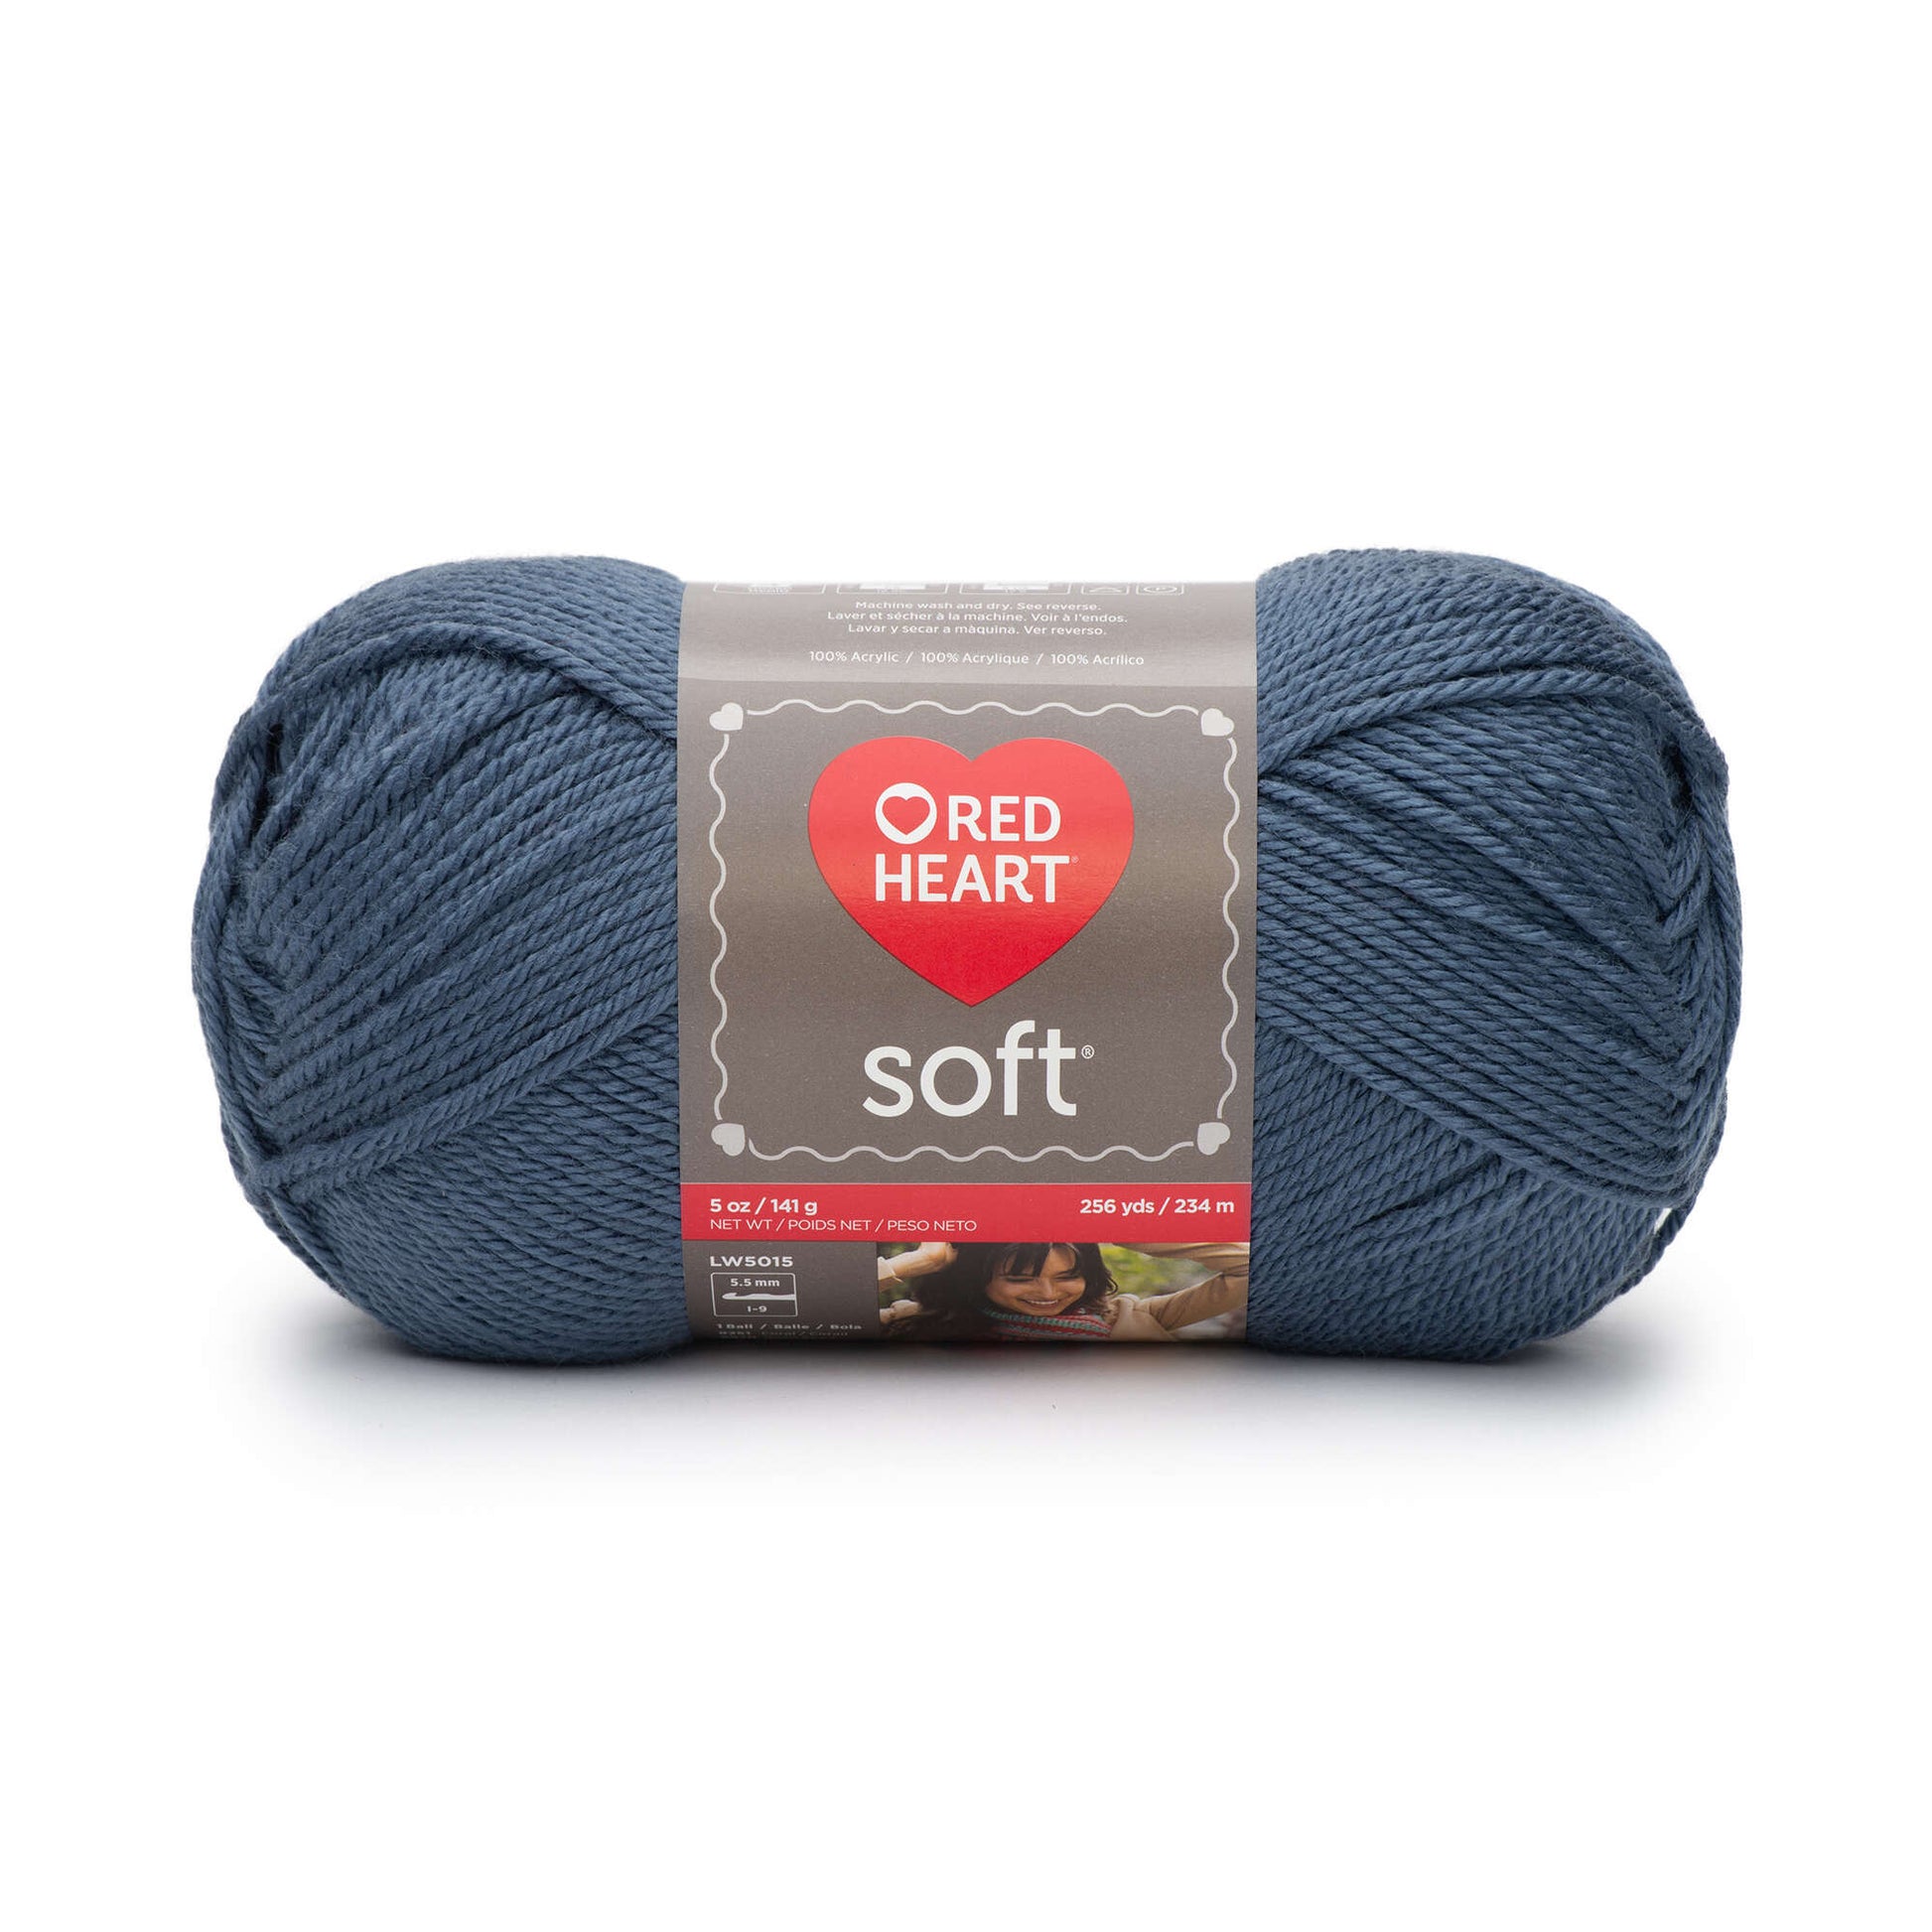 Red Heart Soft Yarn-Really Red, 1 count - Kroger